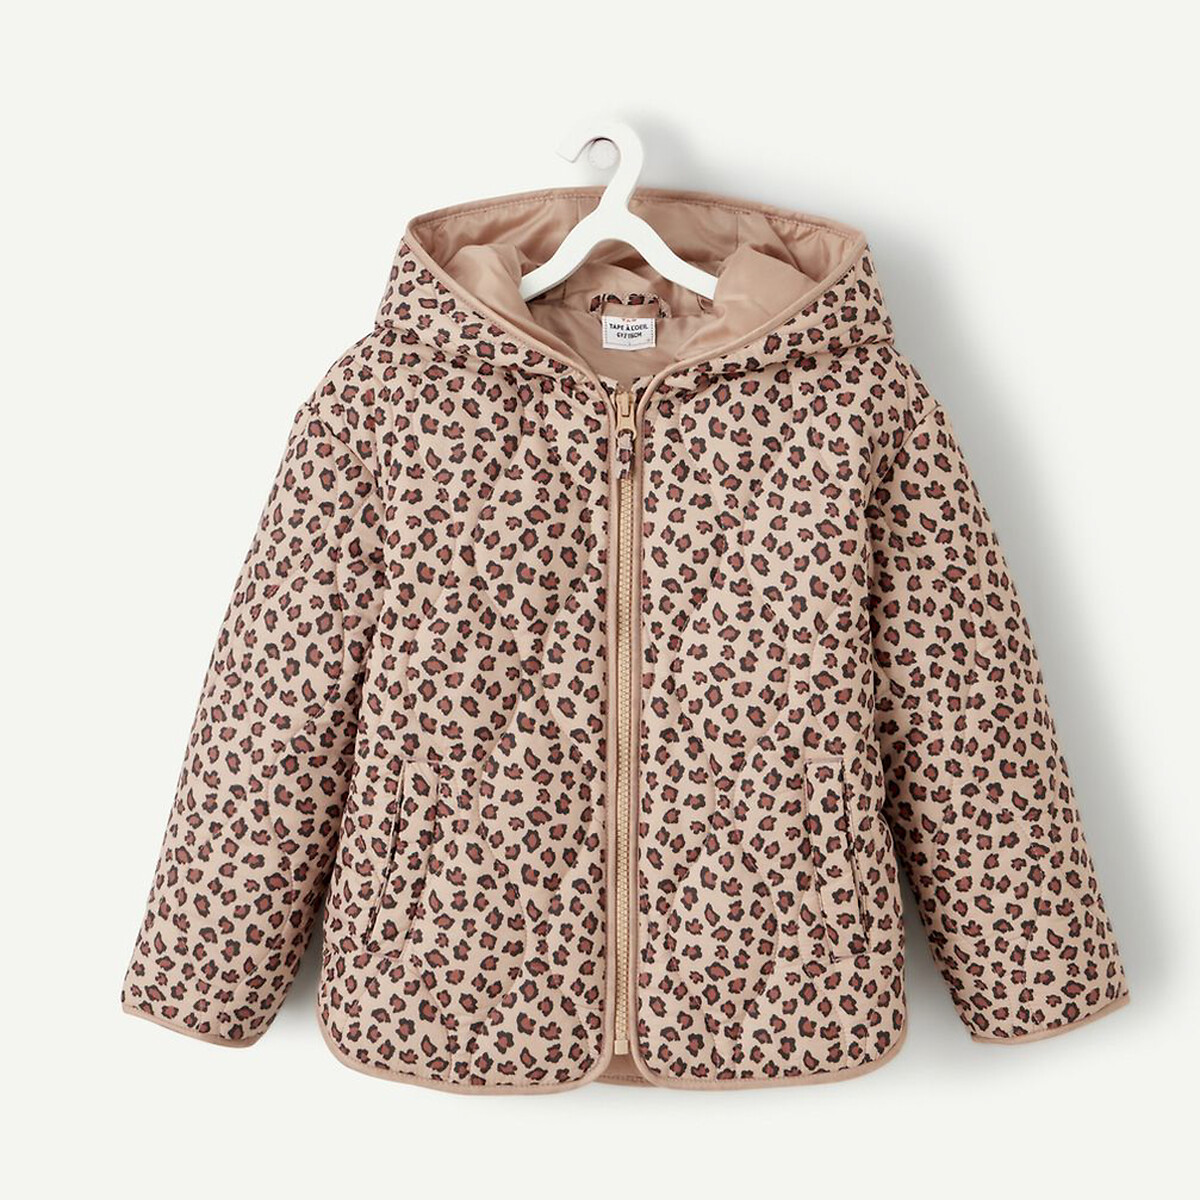 Recycled Padded Jacket in Leopard Print with Hood